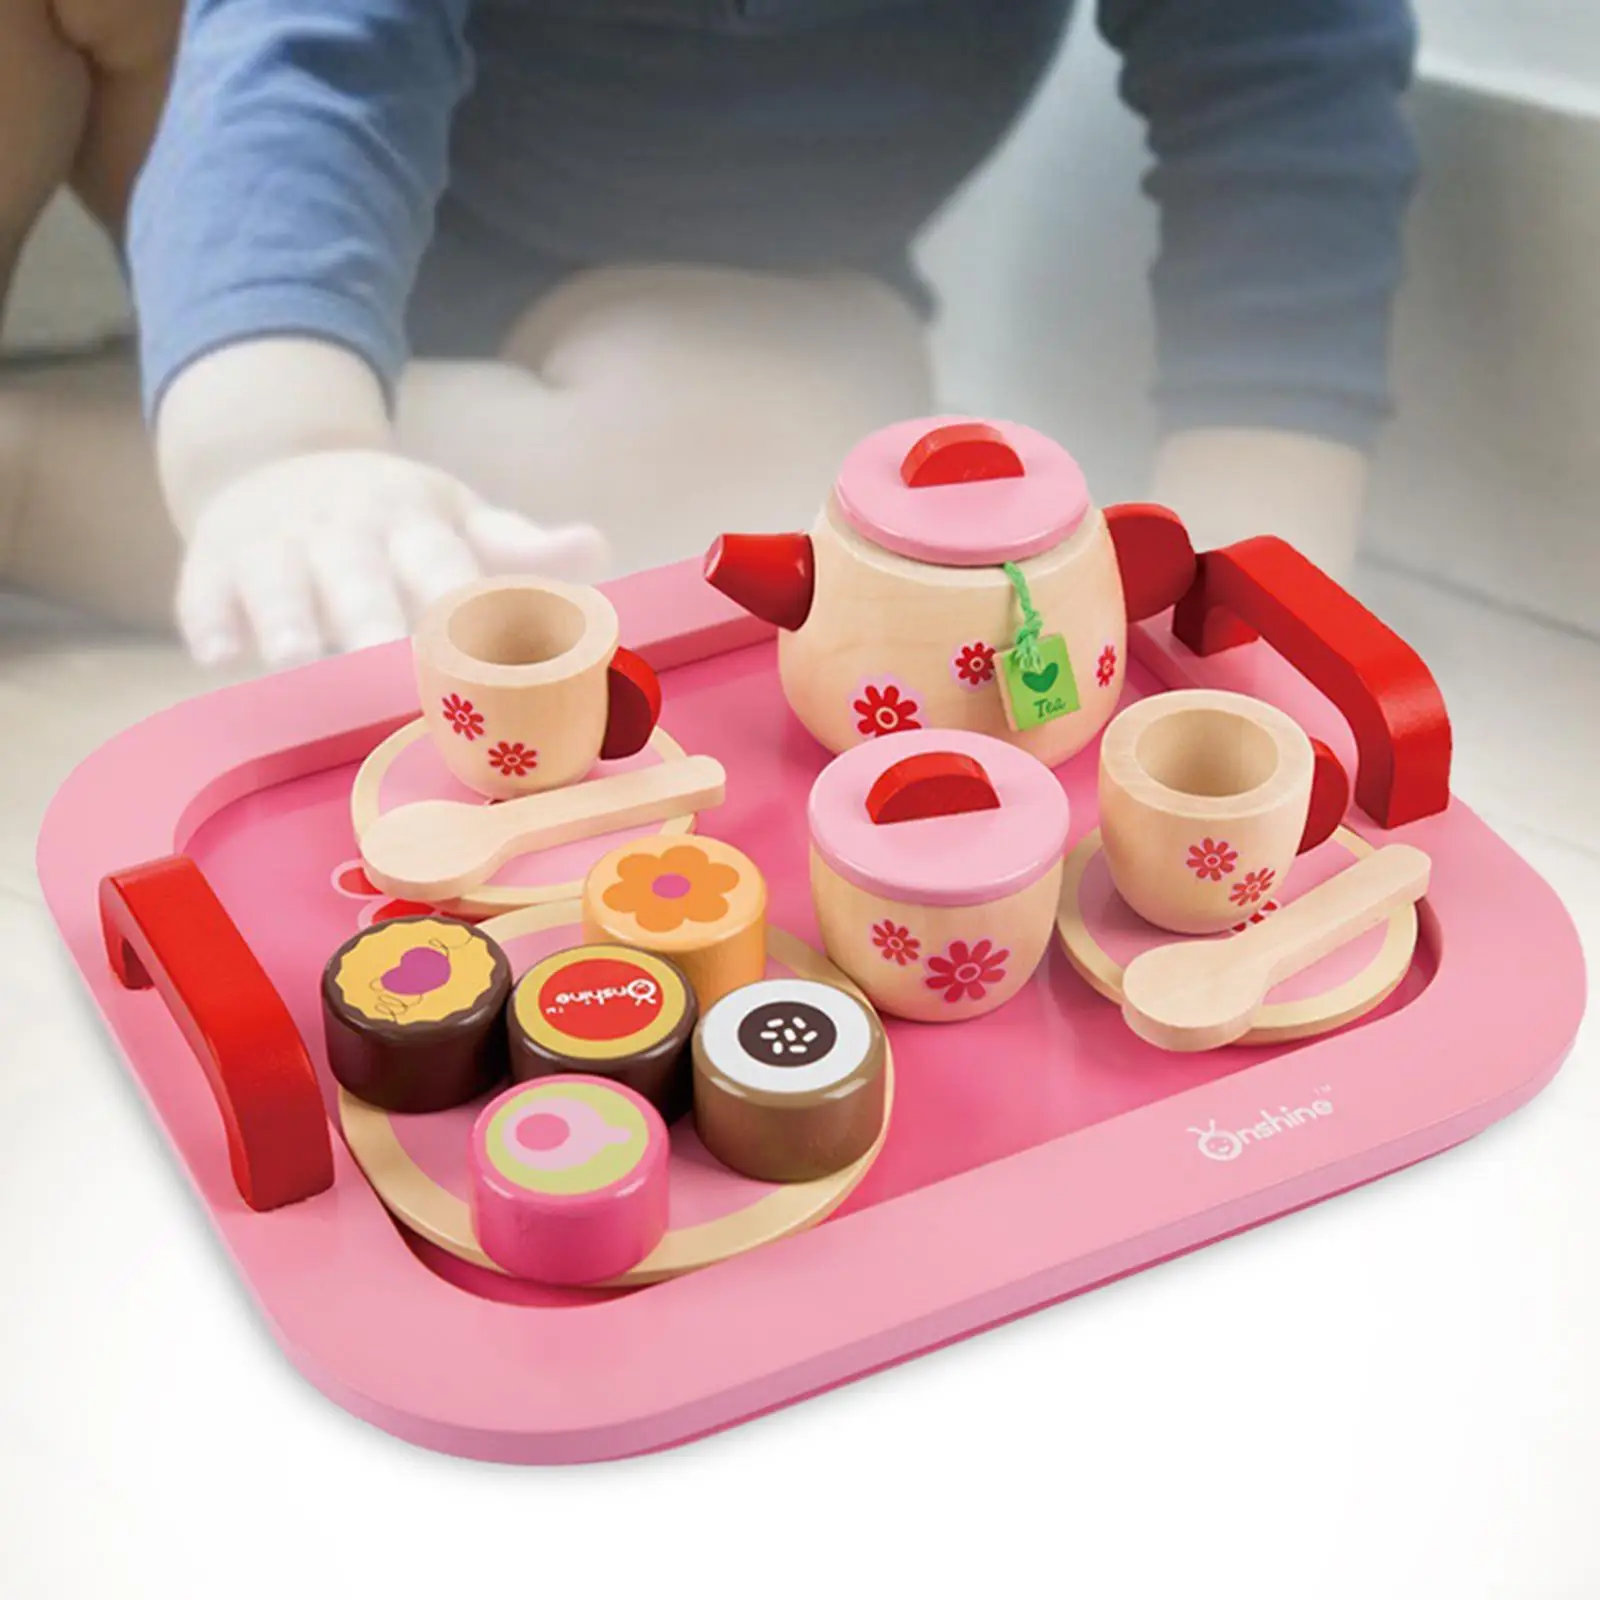 Wooden Pretend Play Tea Party Set Simulation Teacup Toy for Little Girls